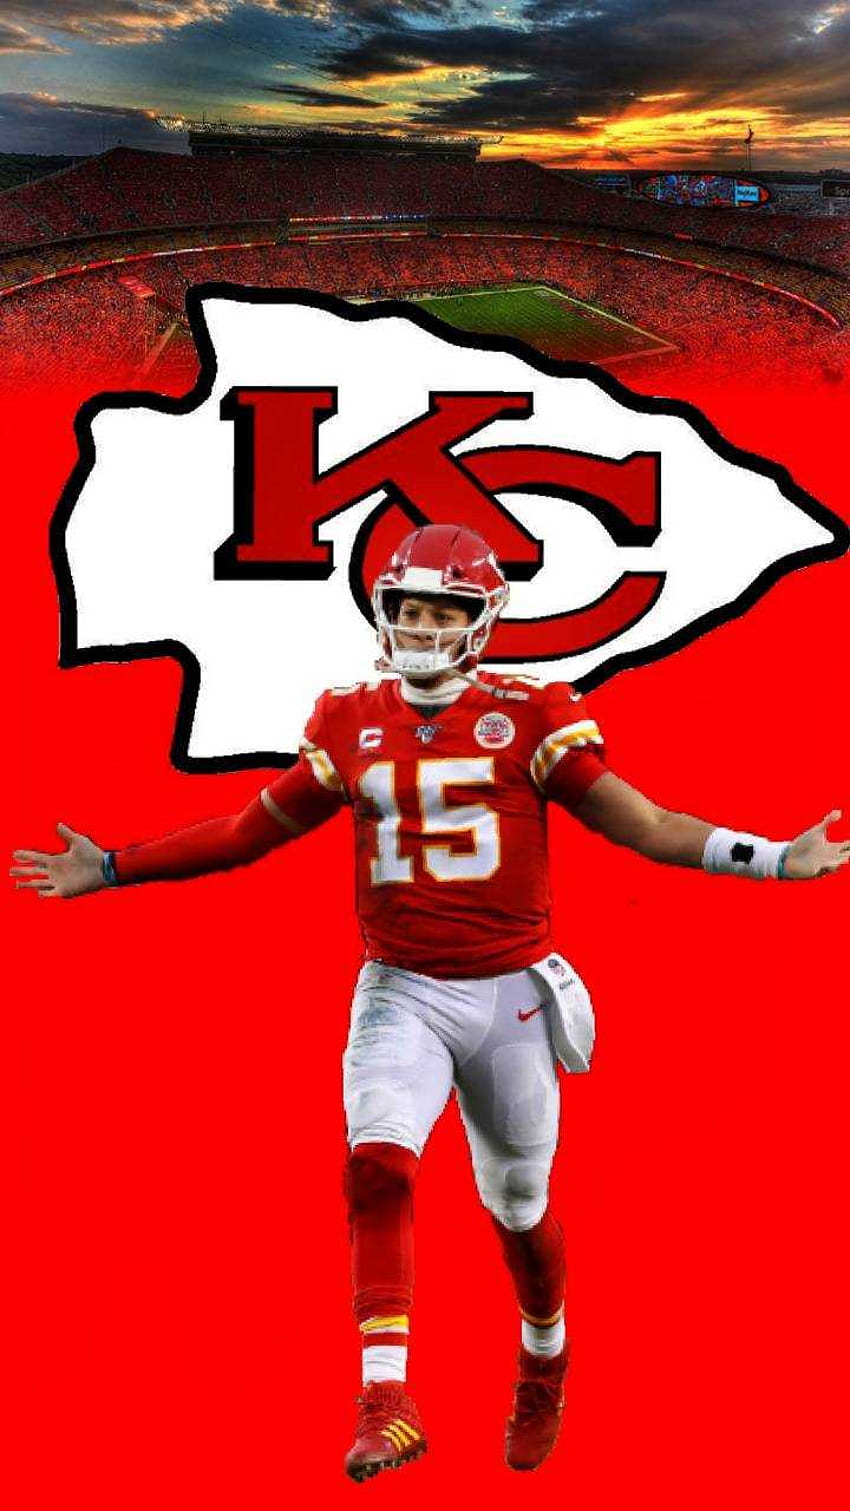 American Football Superstar Patrick Mahomes Poster Print Canvas Wall Art  Decor for Boys Room Bedroom Painting Picture for Fans NOUCAN  (16x24inch-Unframed,A) : Amazon.ca: Sports & Outdoors